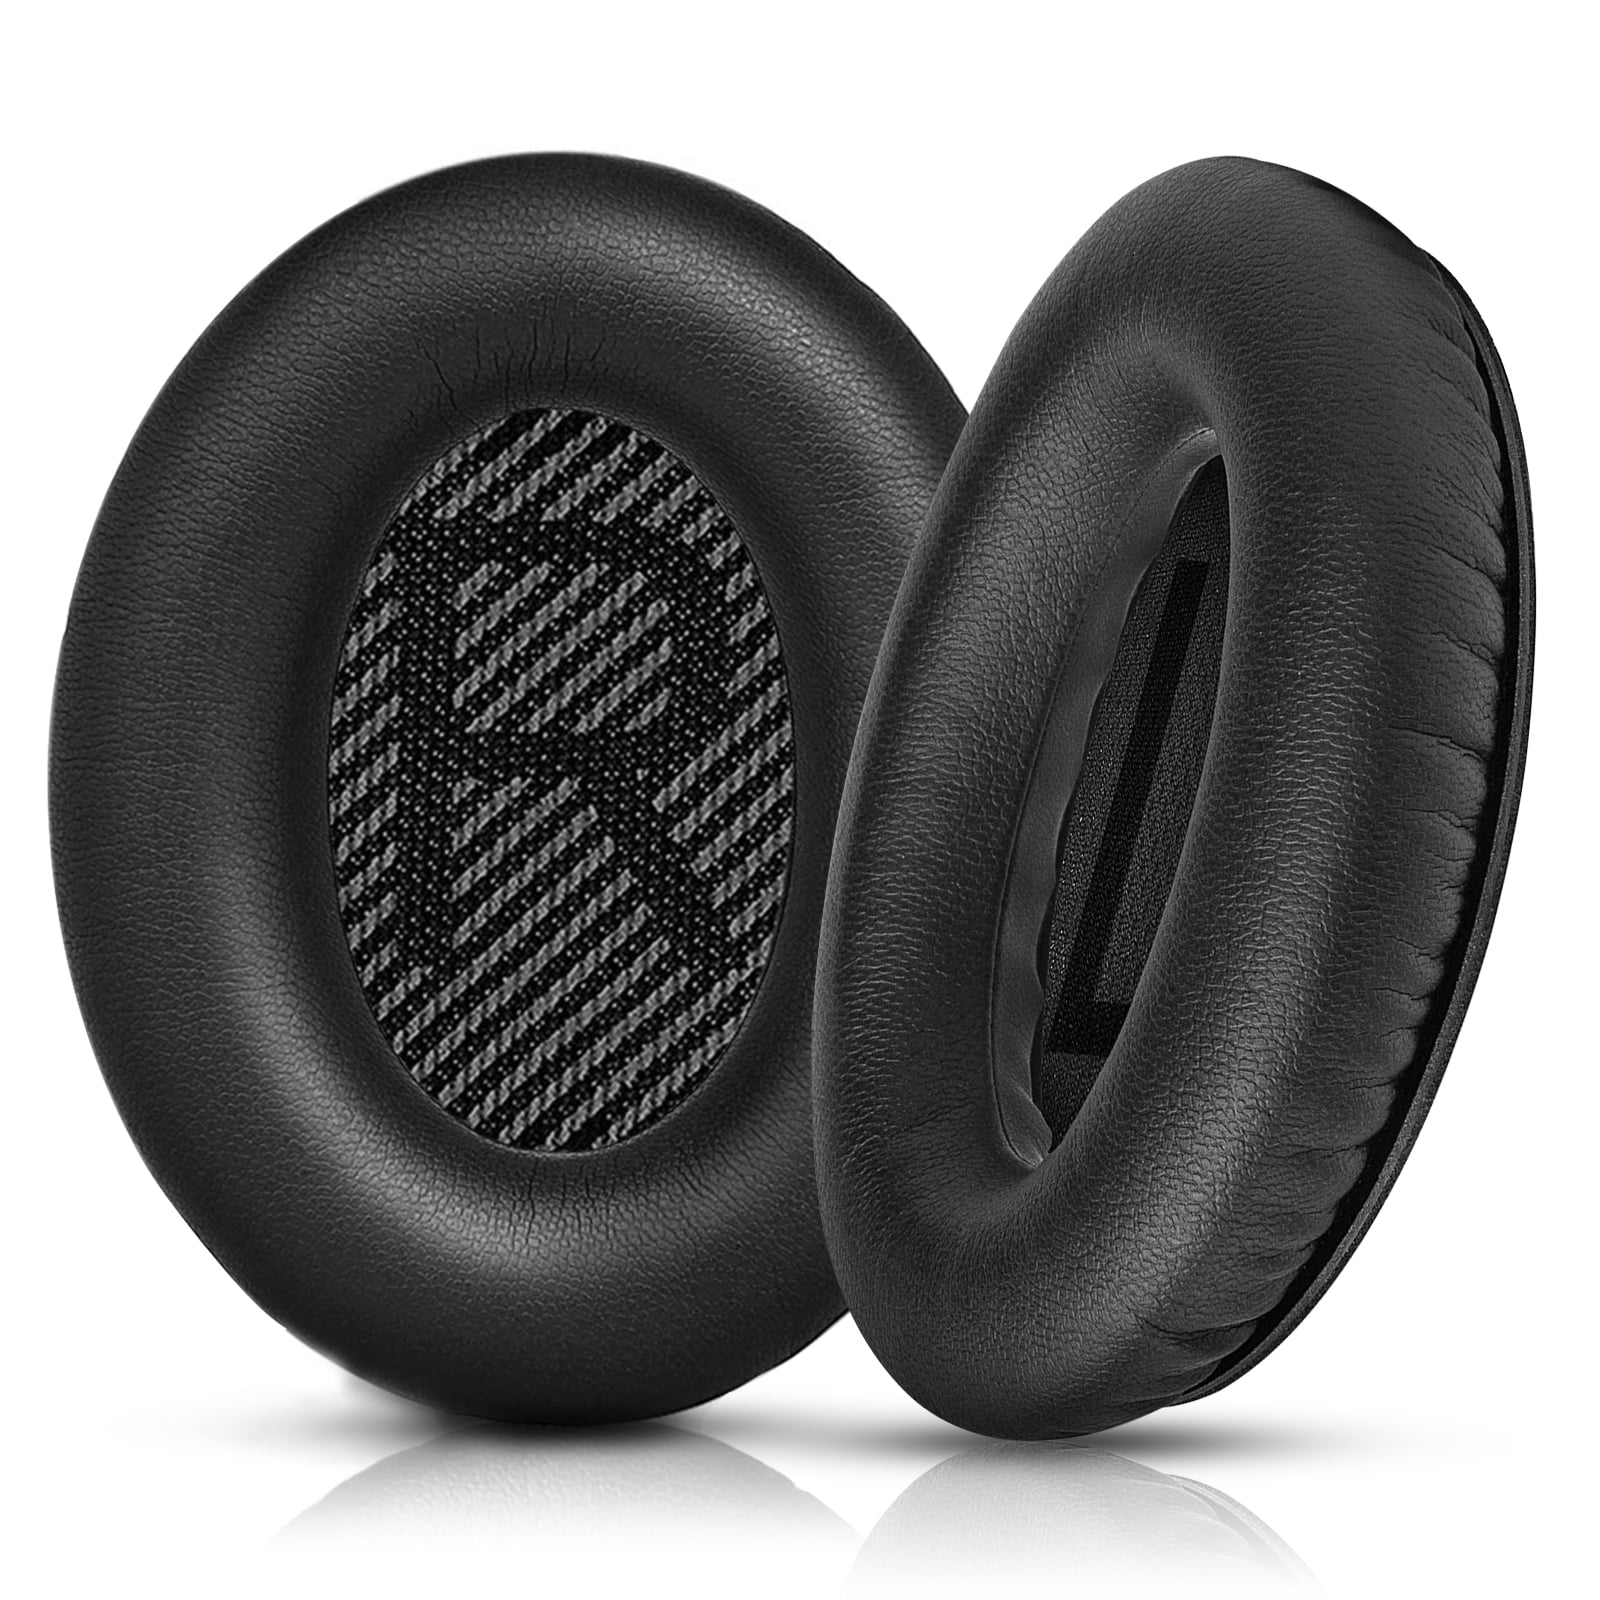 Replacement Ear Pads Fit for Boses Headphones, 2 Pcs Noise Isolation Memory  Foam Ear Cushions Cover Compatible with QuietComfort 35 (Boses QC35), Quiet  Comfort 35 II (Boses QC35 II) over-Ear Headphone 